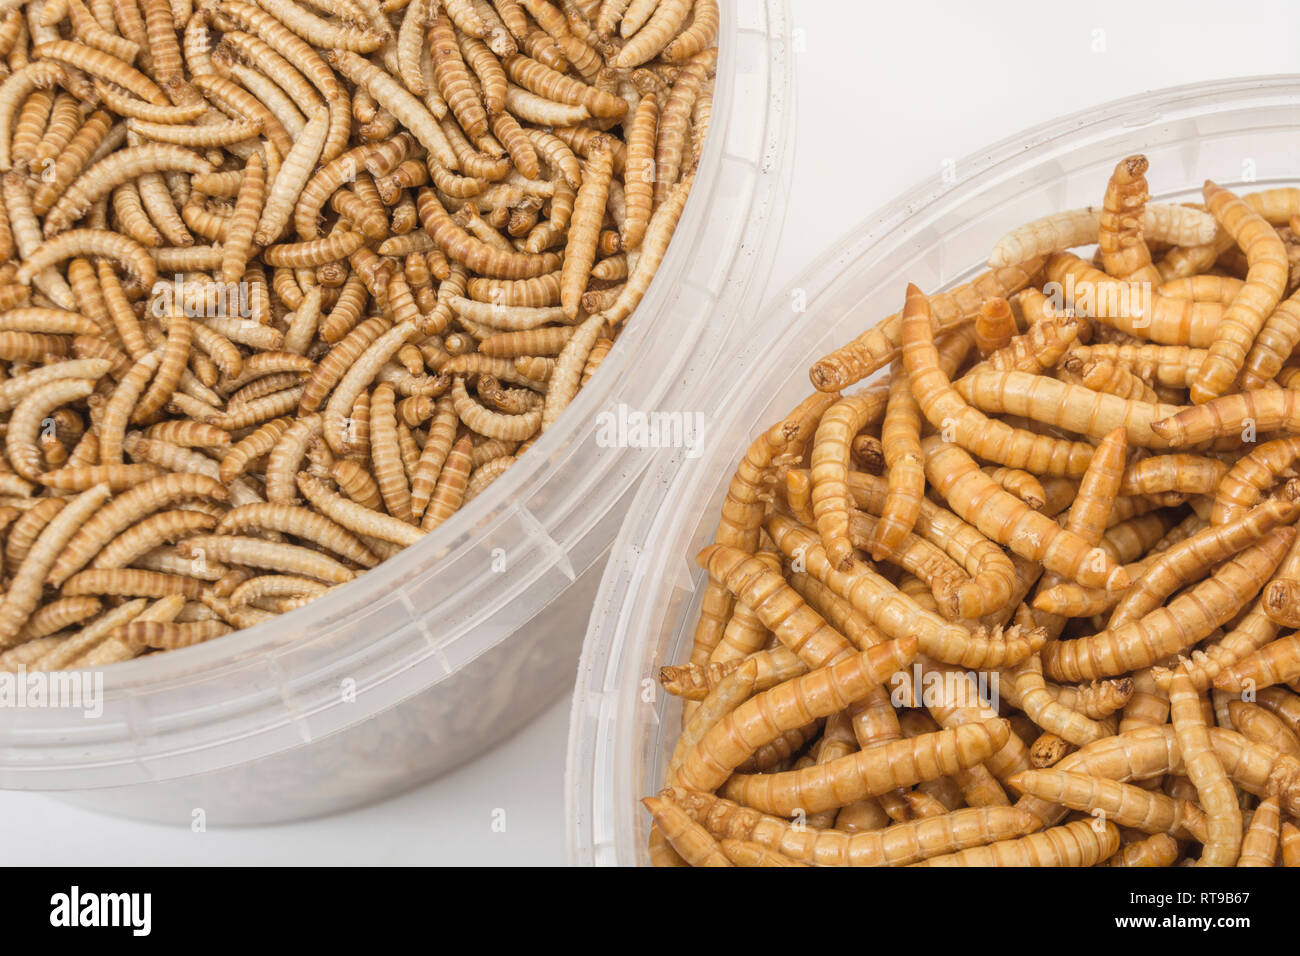 deltager Fejde Dom Edible Mealworms / Tenebrio molitor (R) & smaller Buffalo worms /  Alphitobius diaperinus (L). Metaphor eating bugs, eating insects,  Entomophagy Stock Photo - Alamy